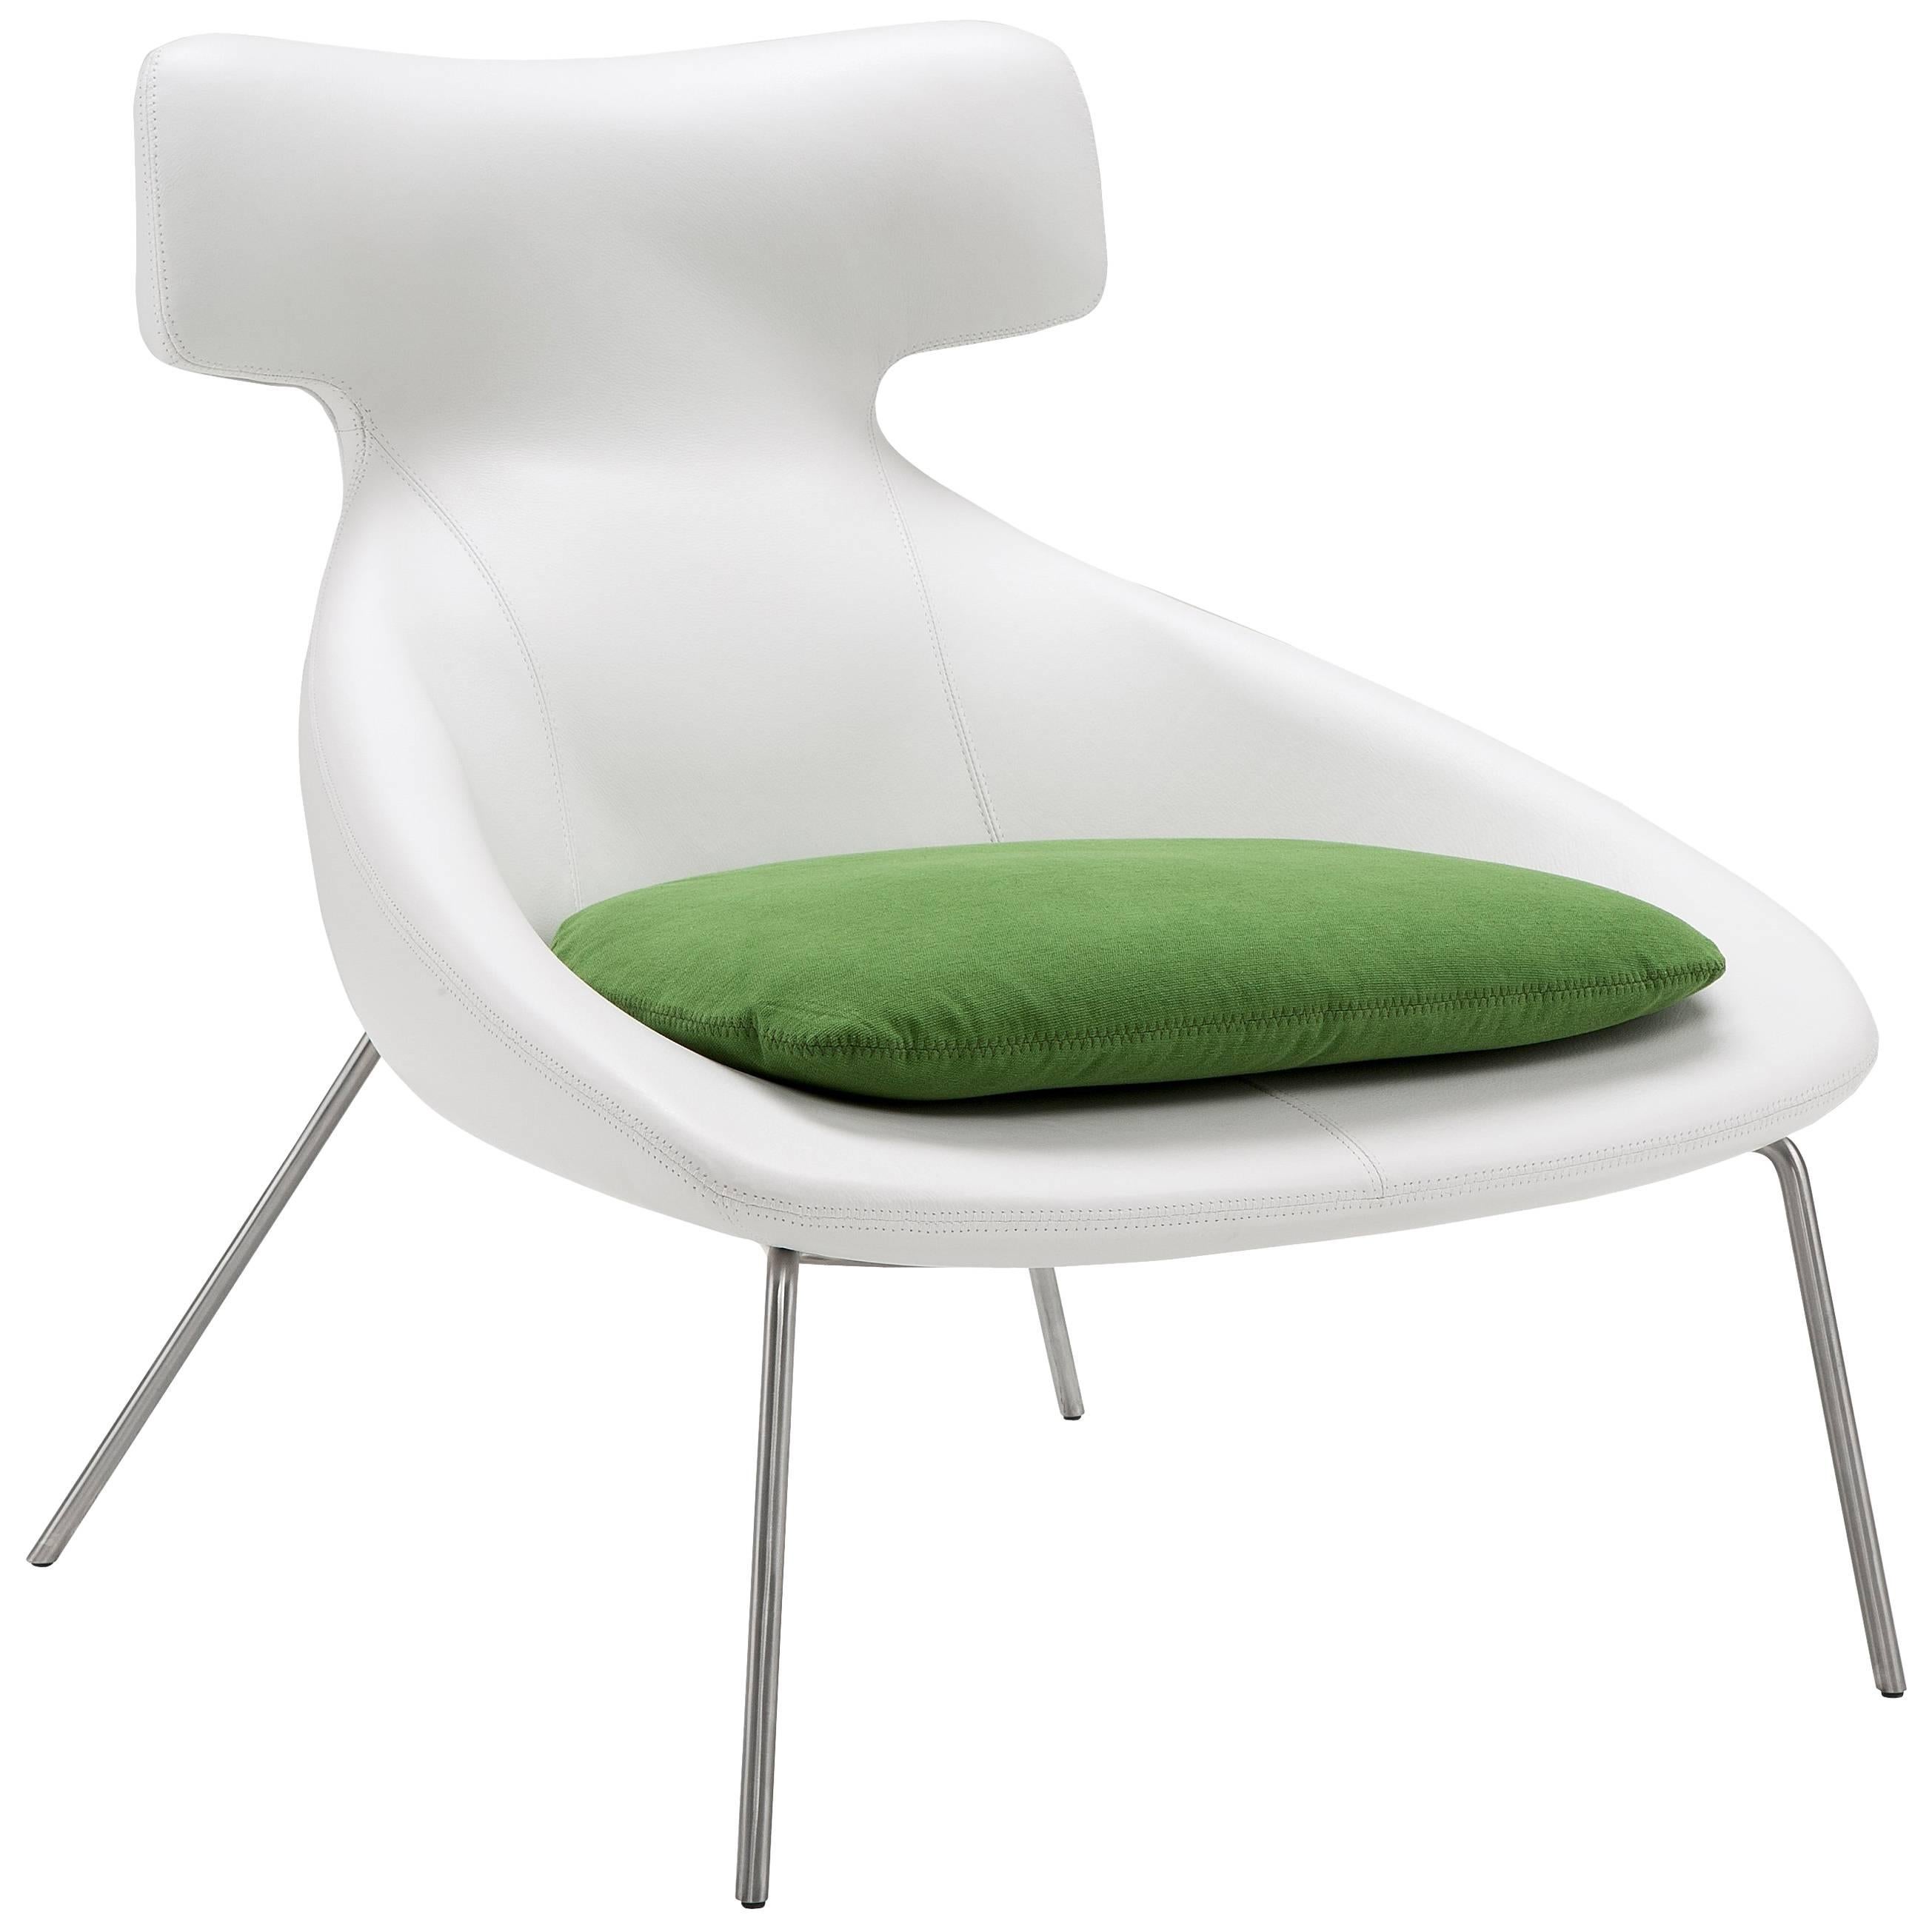 Oslo Armchair in White and Green by Maurizio Marconato & Terry Zappa For Sale